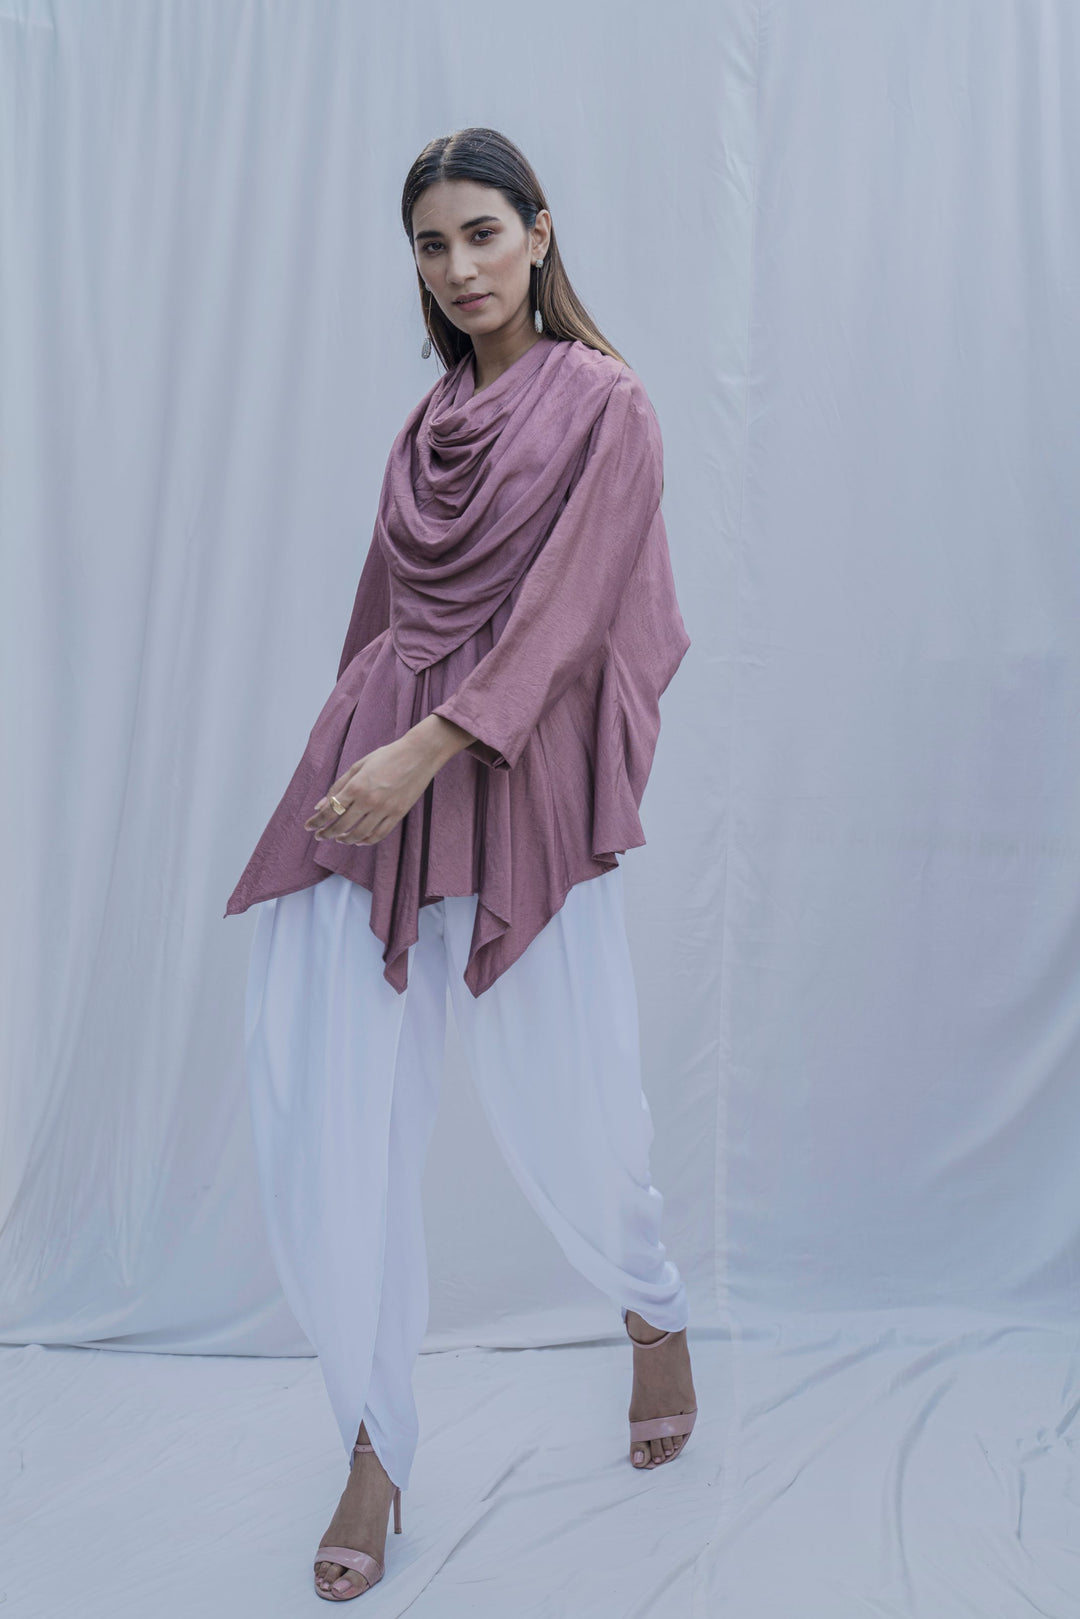 Dream Cowl Top in Mauve and Tulip Dhoti in White - Set